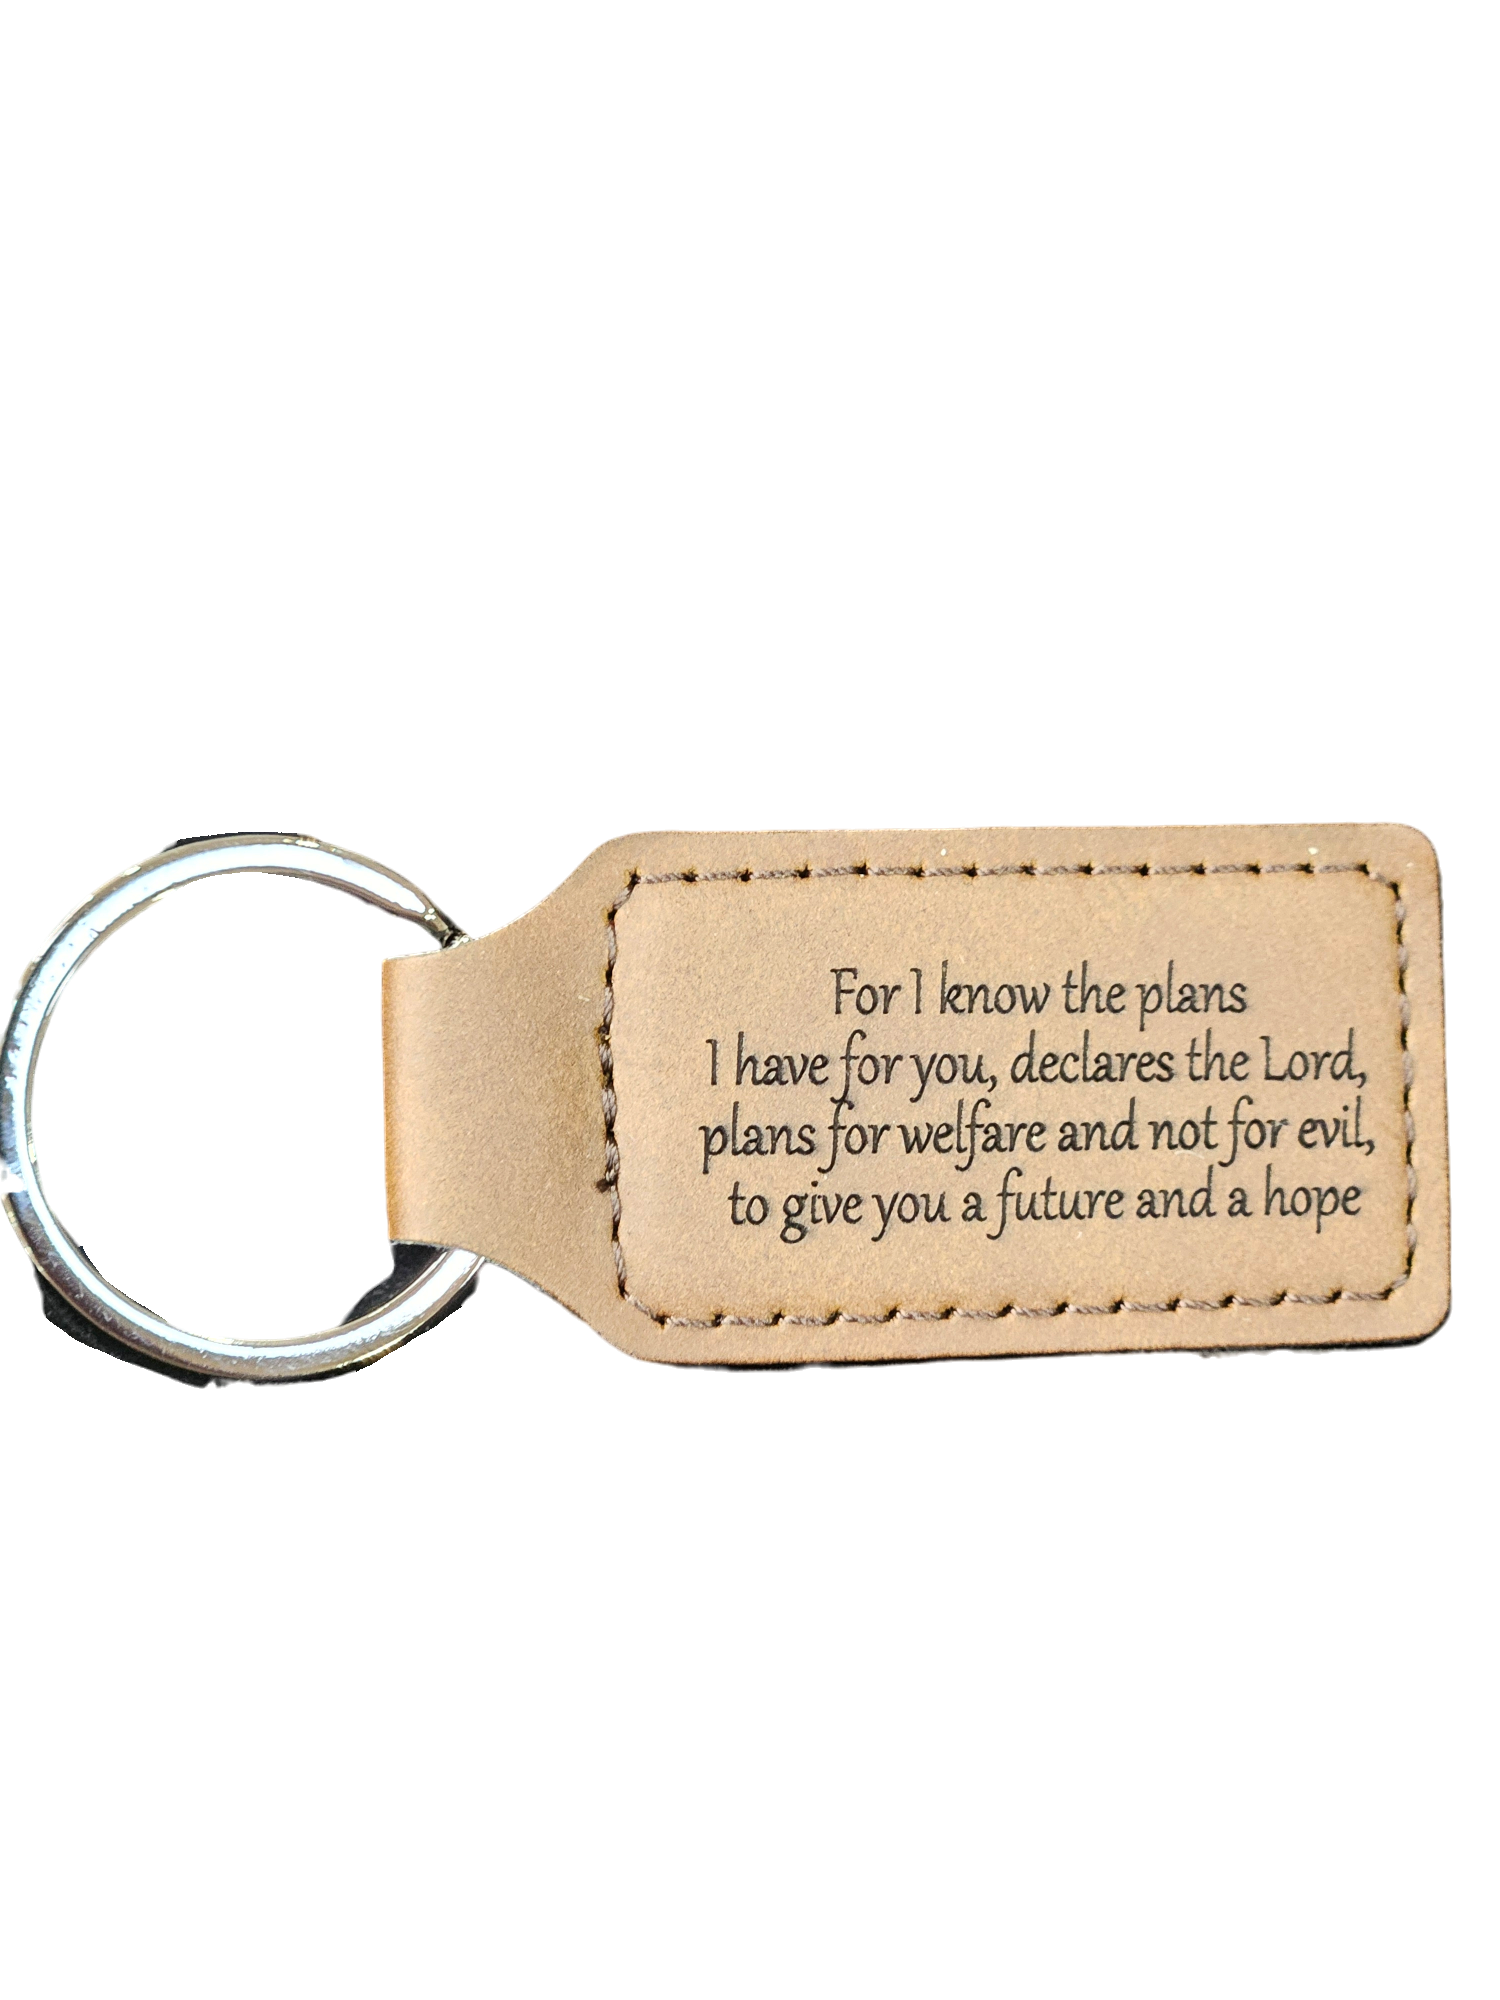 For I know the plans I have for you- keychain